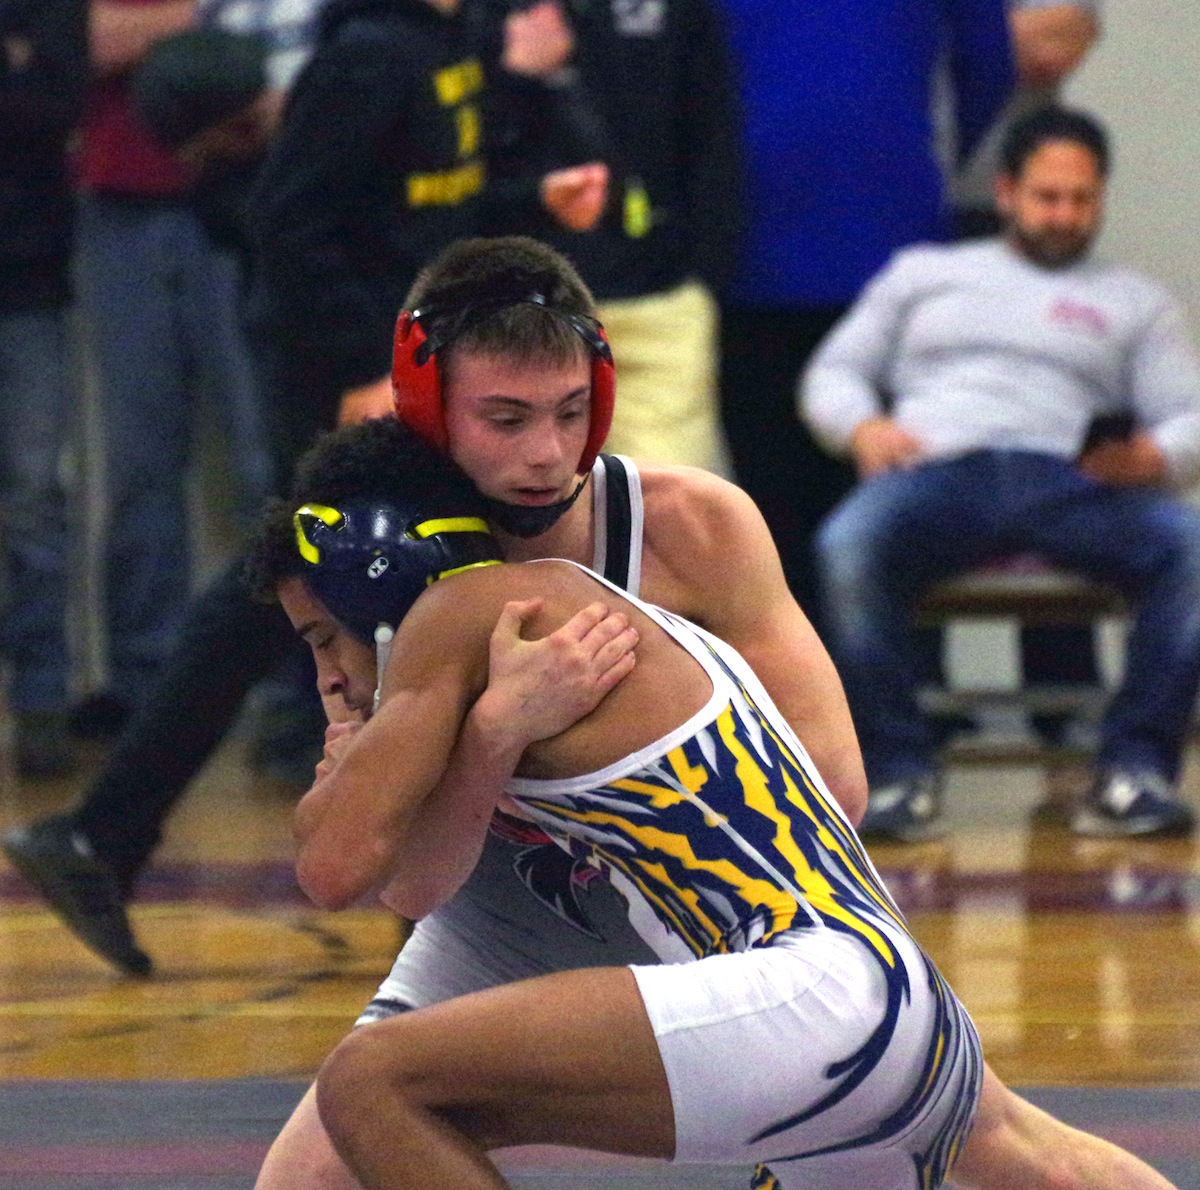 Collin Coughenour (red helmet) wrestles versus Michael Snowden of Niagara Falls in the 120-pound class. Coughenour defeated Snowden to win his second Section VI title. (Photos by Larry Austin)